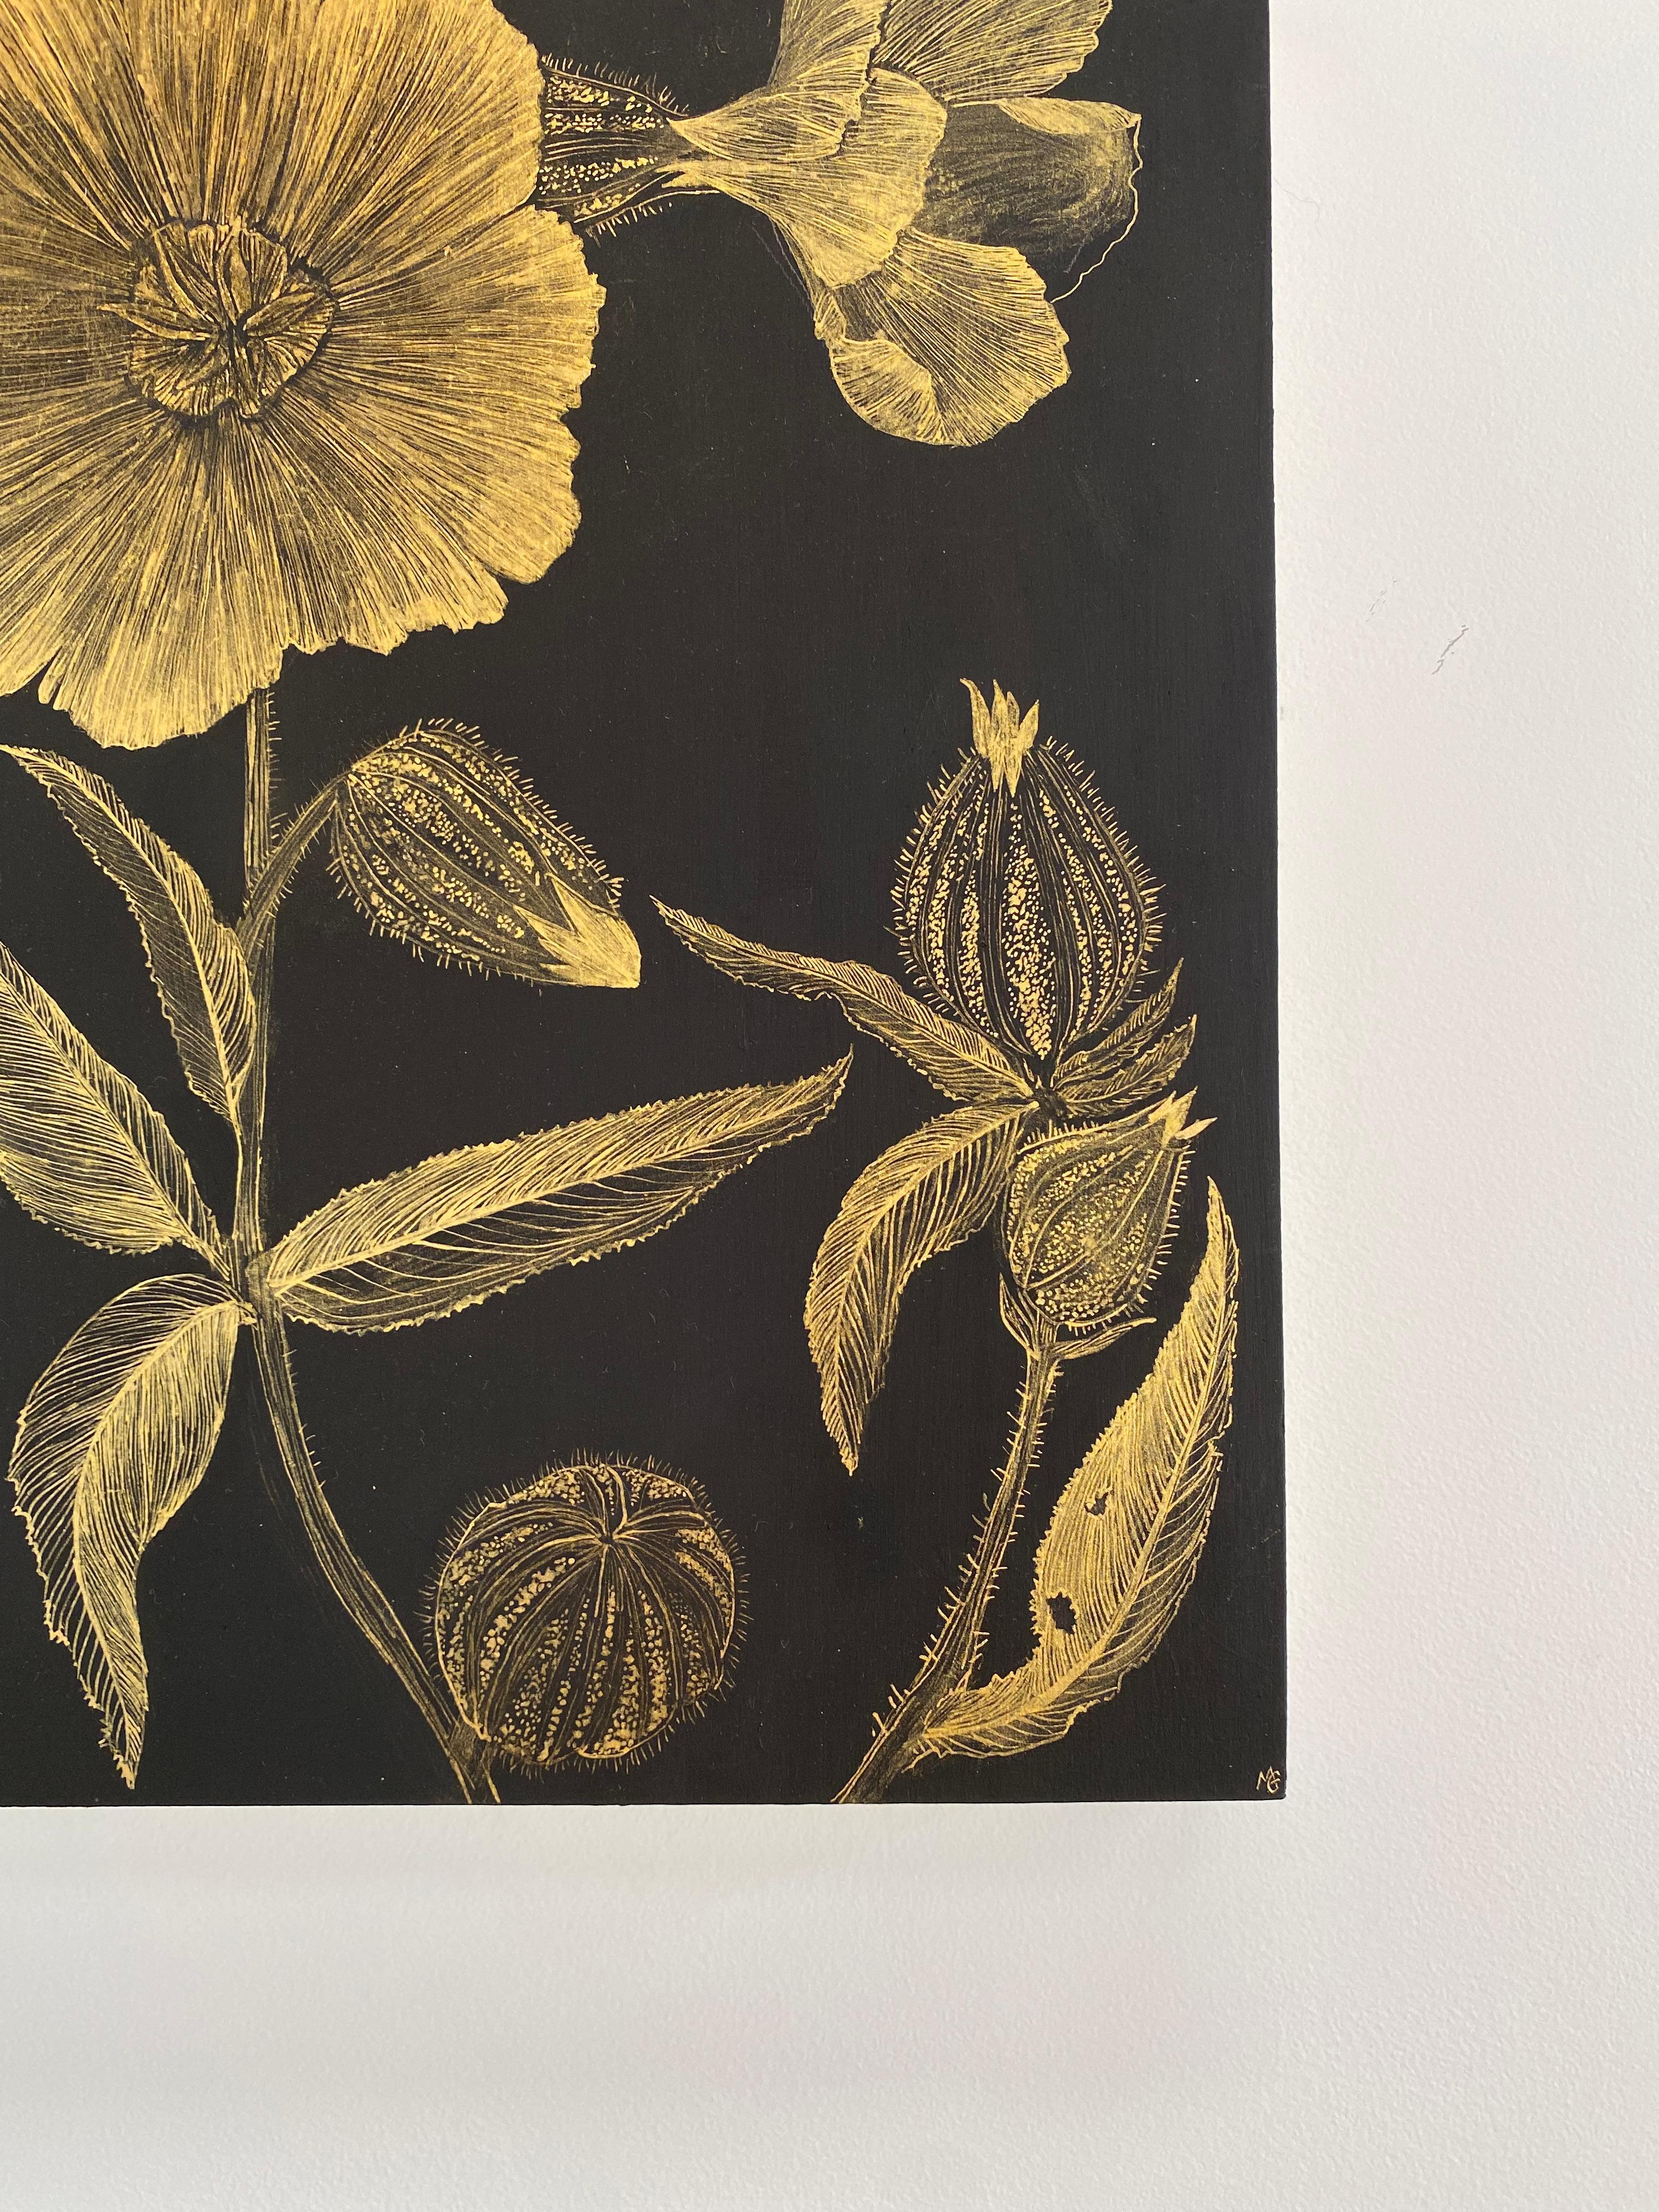 Marshmallow Two, Gold Flowers, Leaves Stem, Metallic Botanical Painting on Black For Sale 11